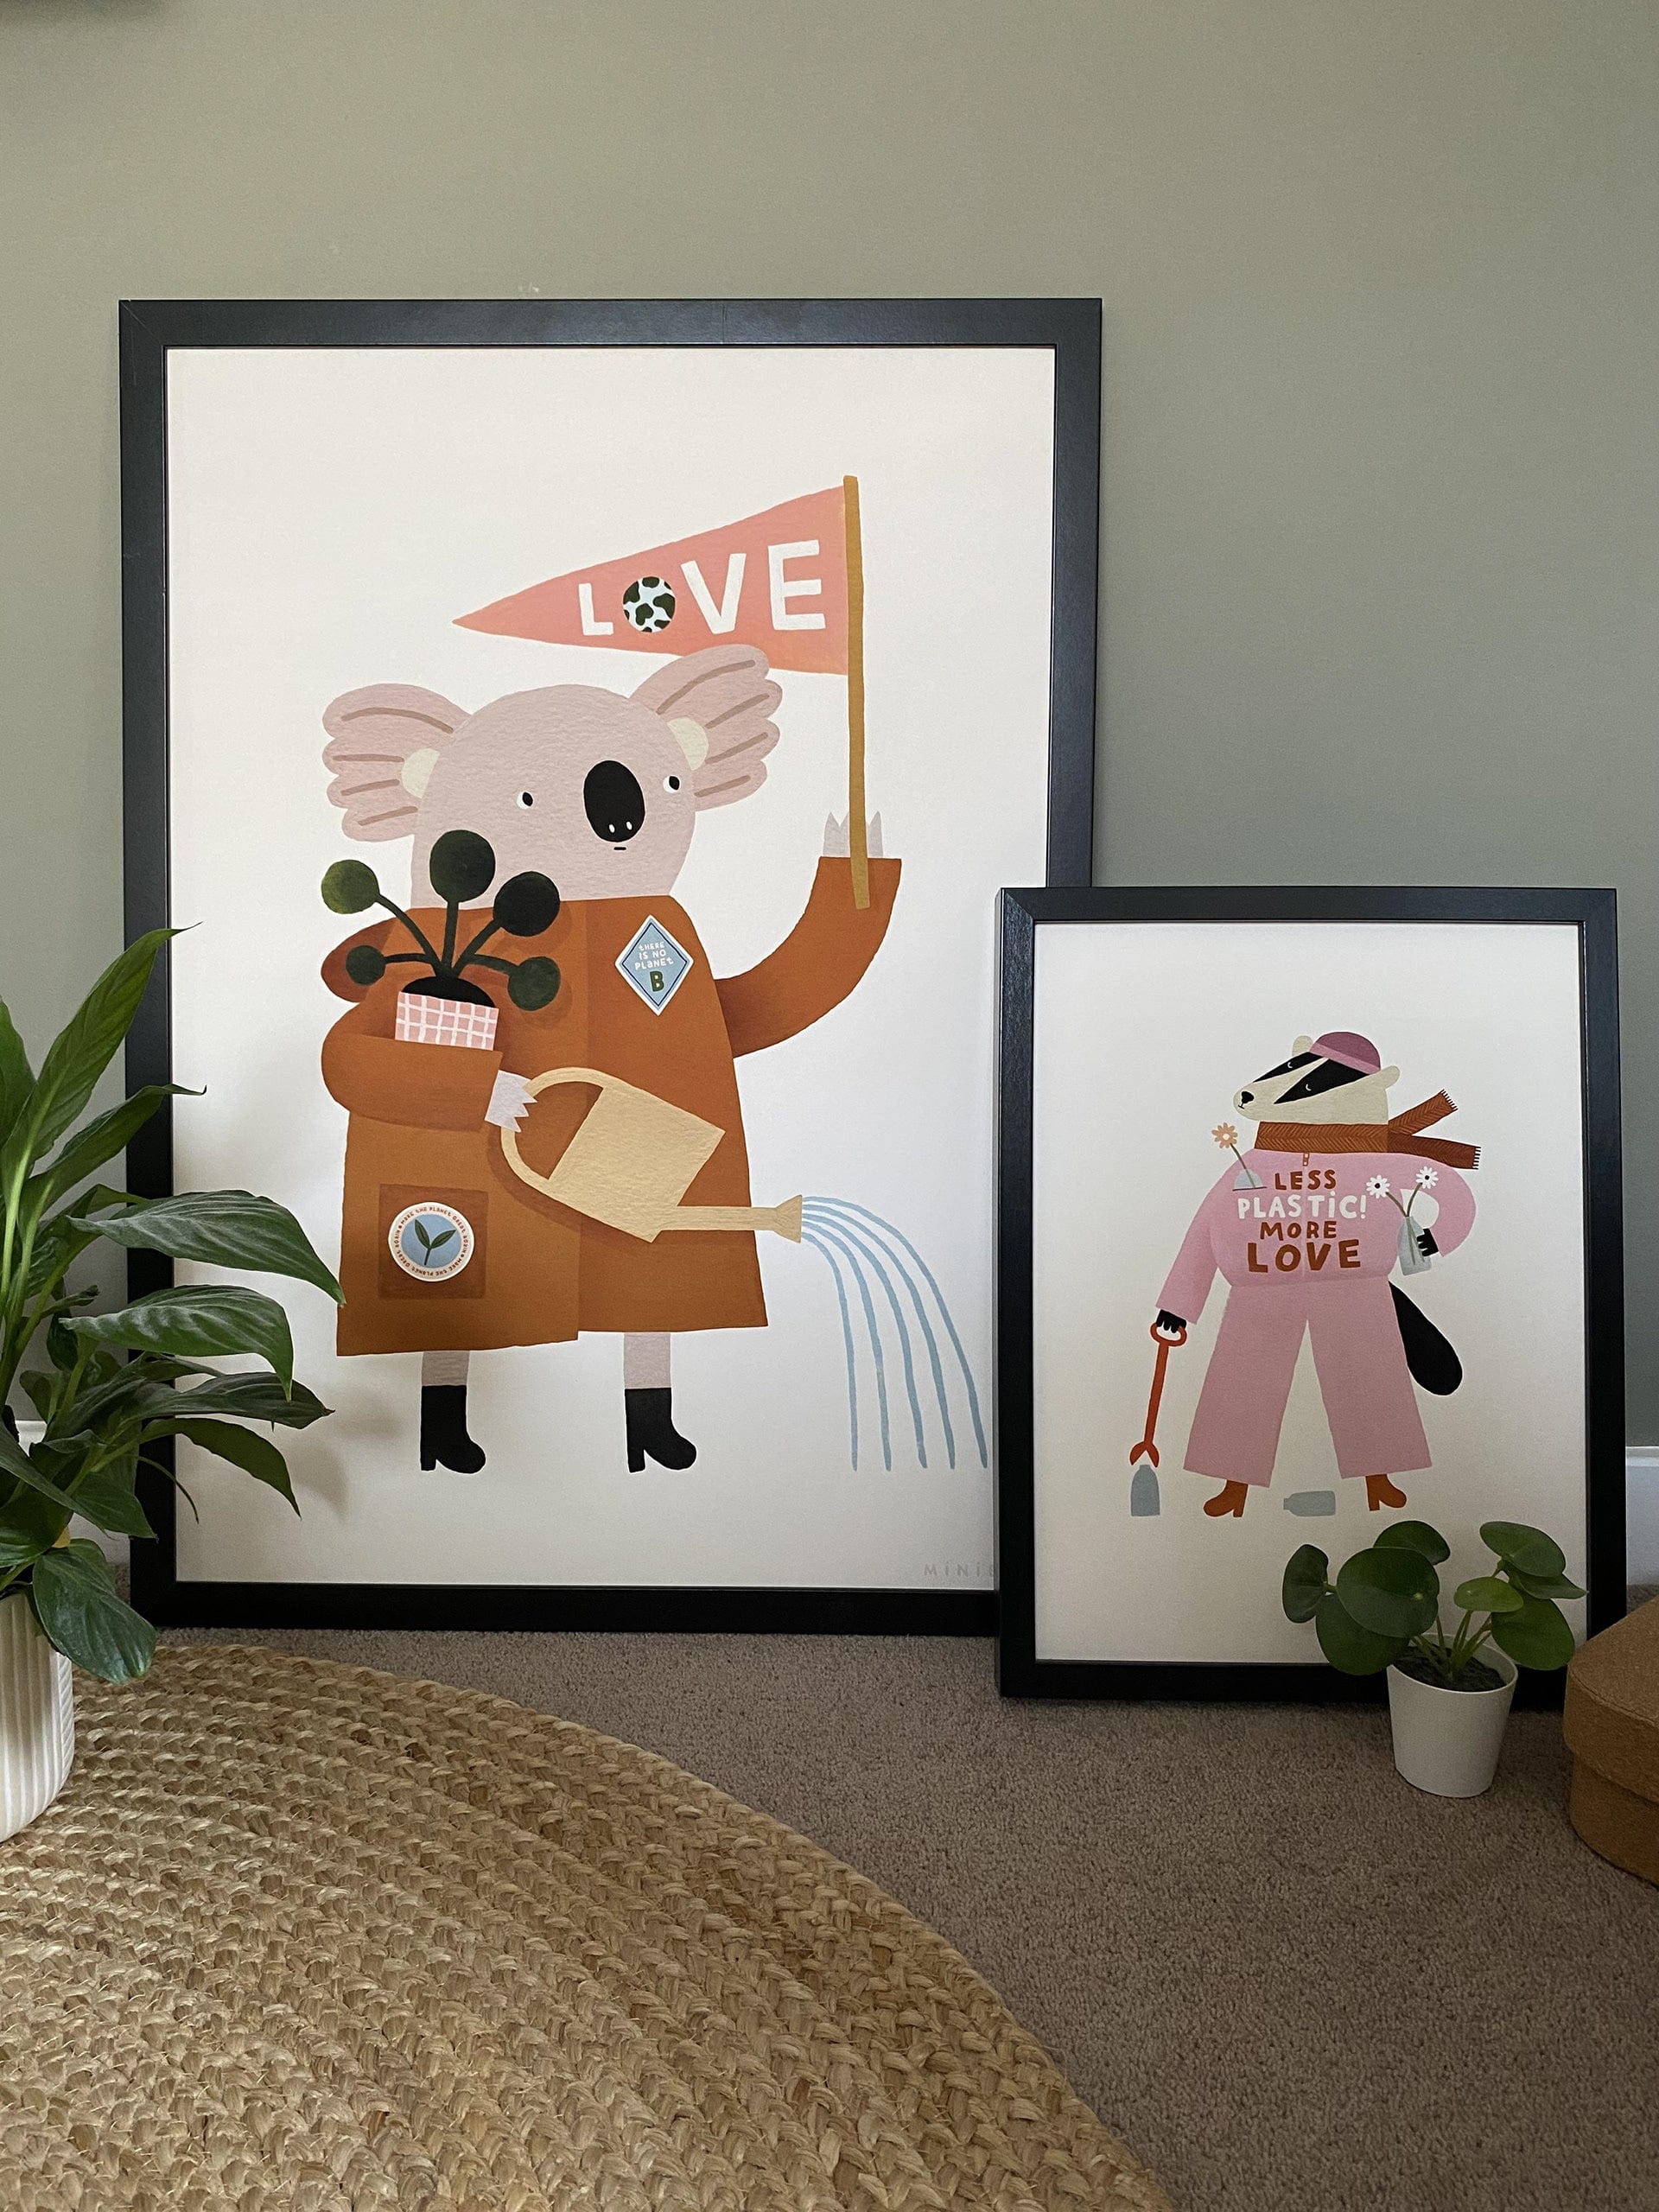 Our Love our planet art print in a large black frame, and our less plastic more love art print leaning on it in a smaller black frame, in front of a green wall, with a round jute rug and plants in the foreground.